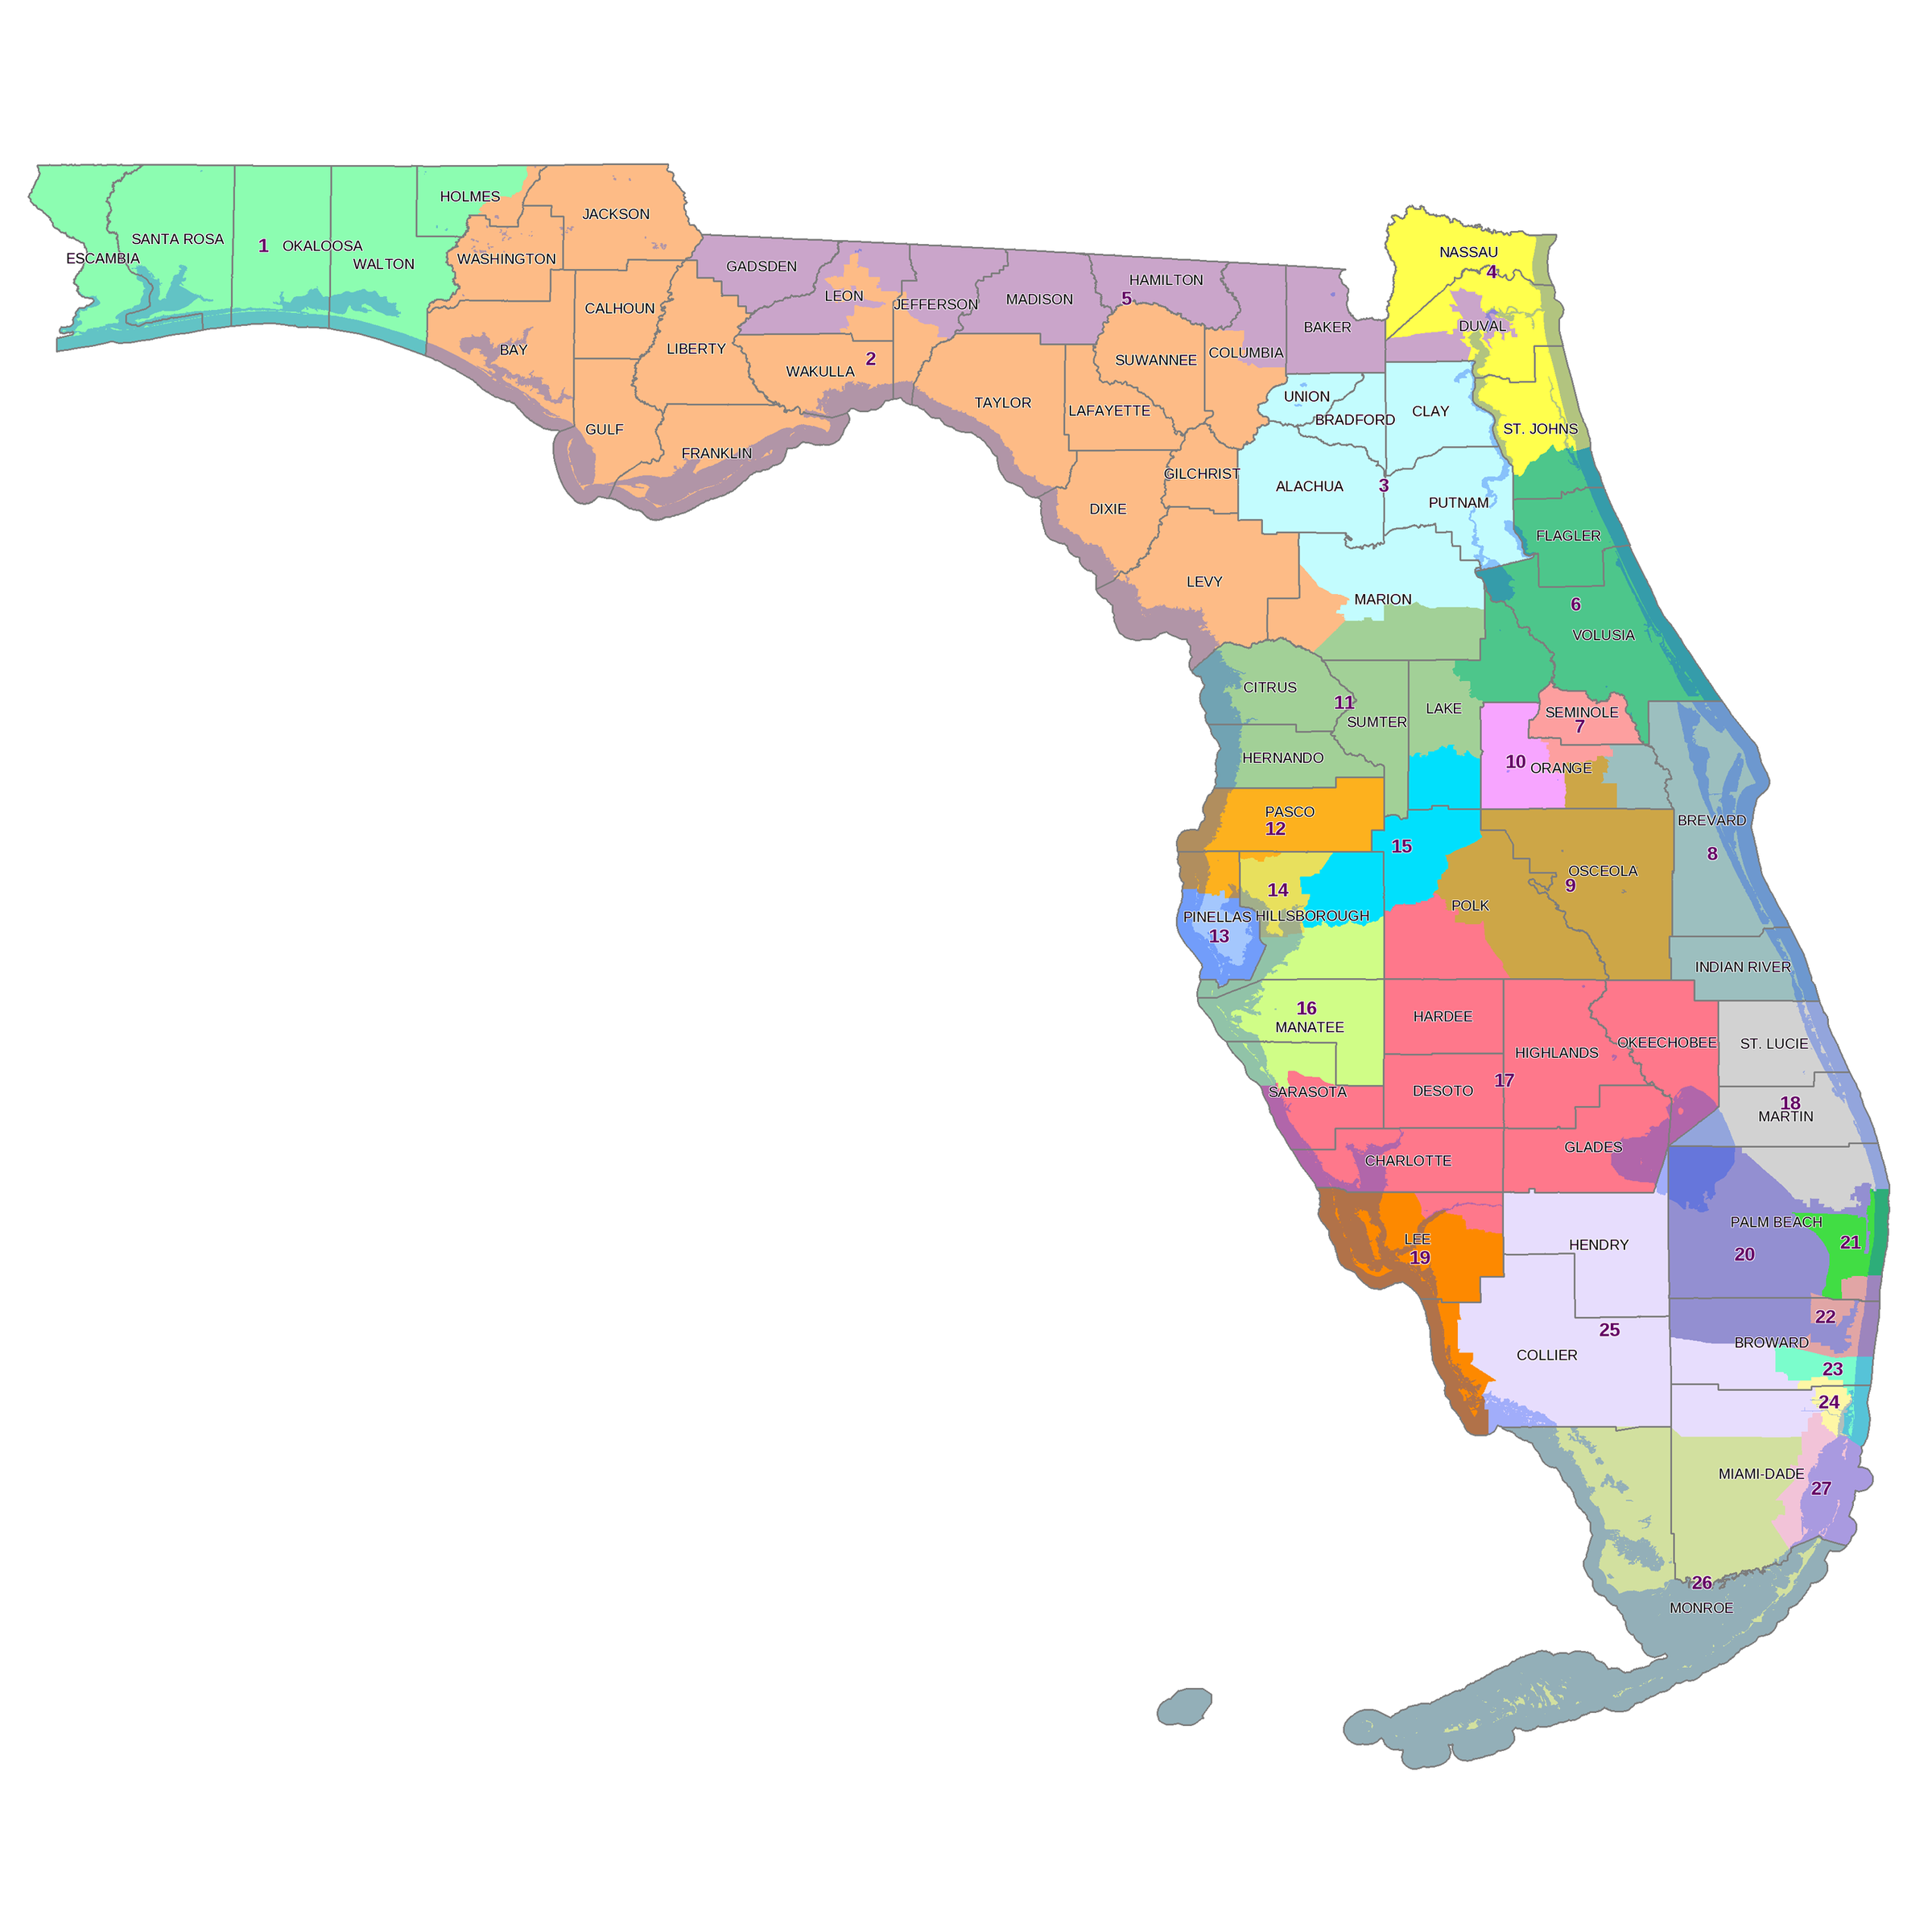 congressional districts florida map house redistricting district voting wjct approves plan session stage sets political special fire legislative taking fl